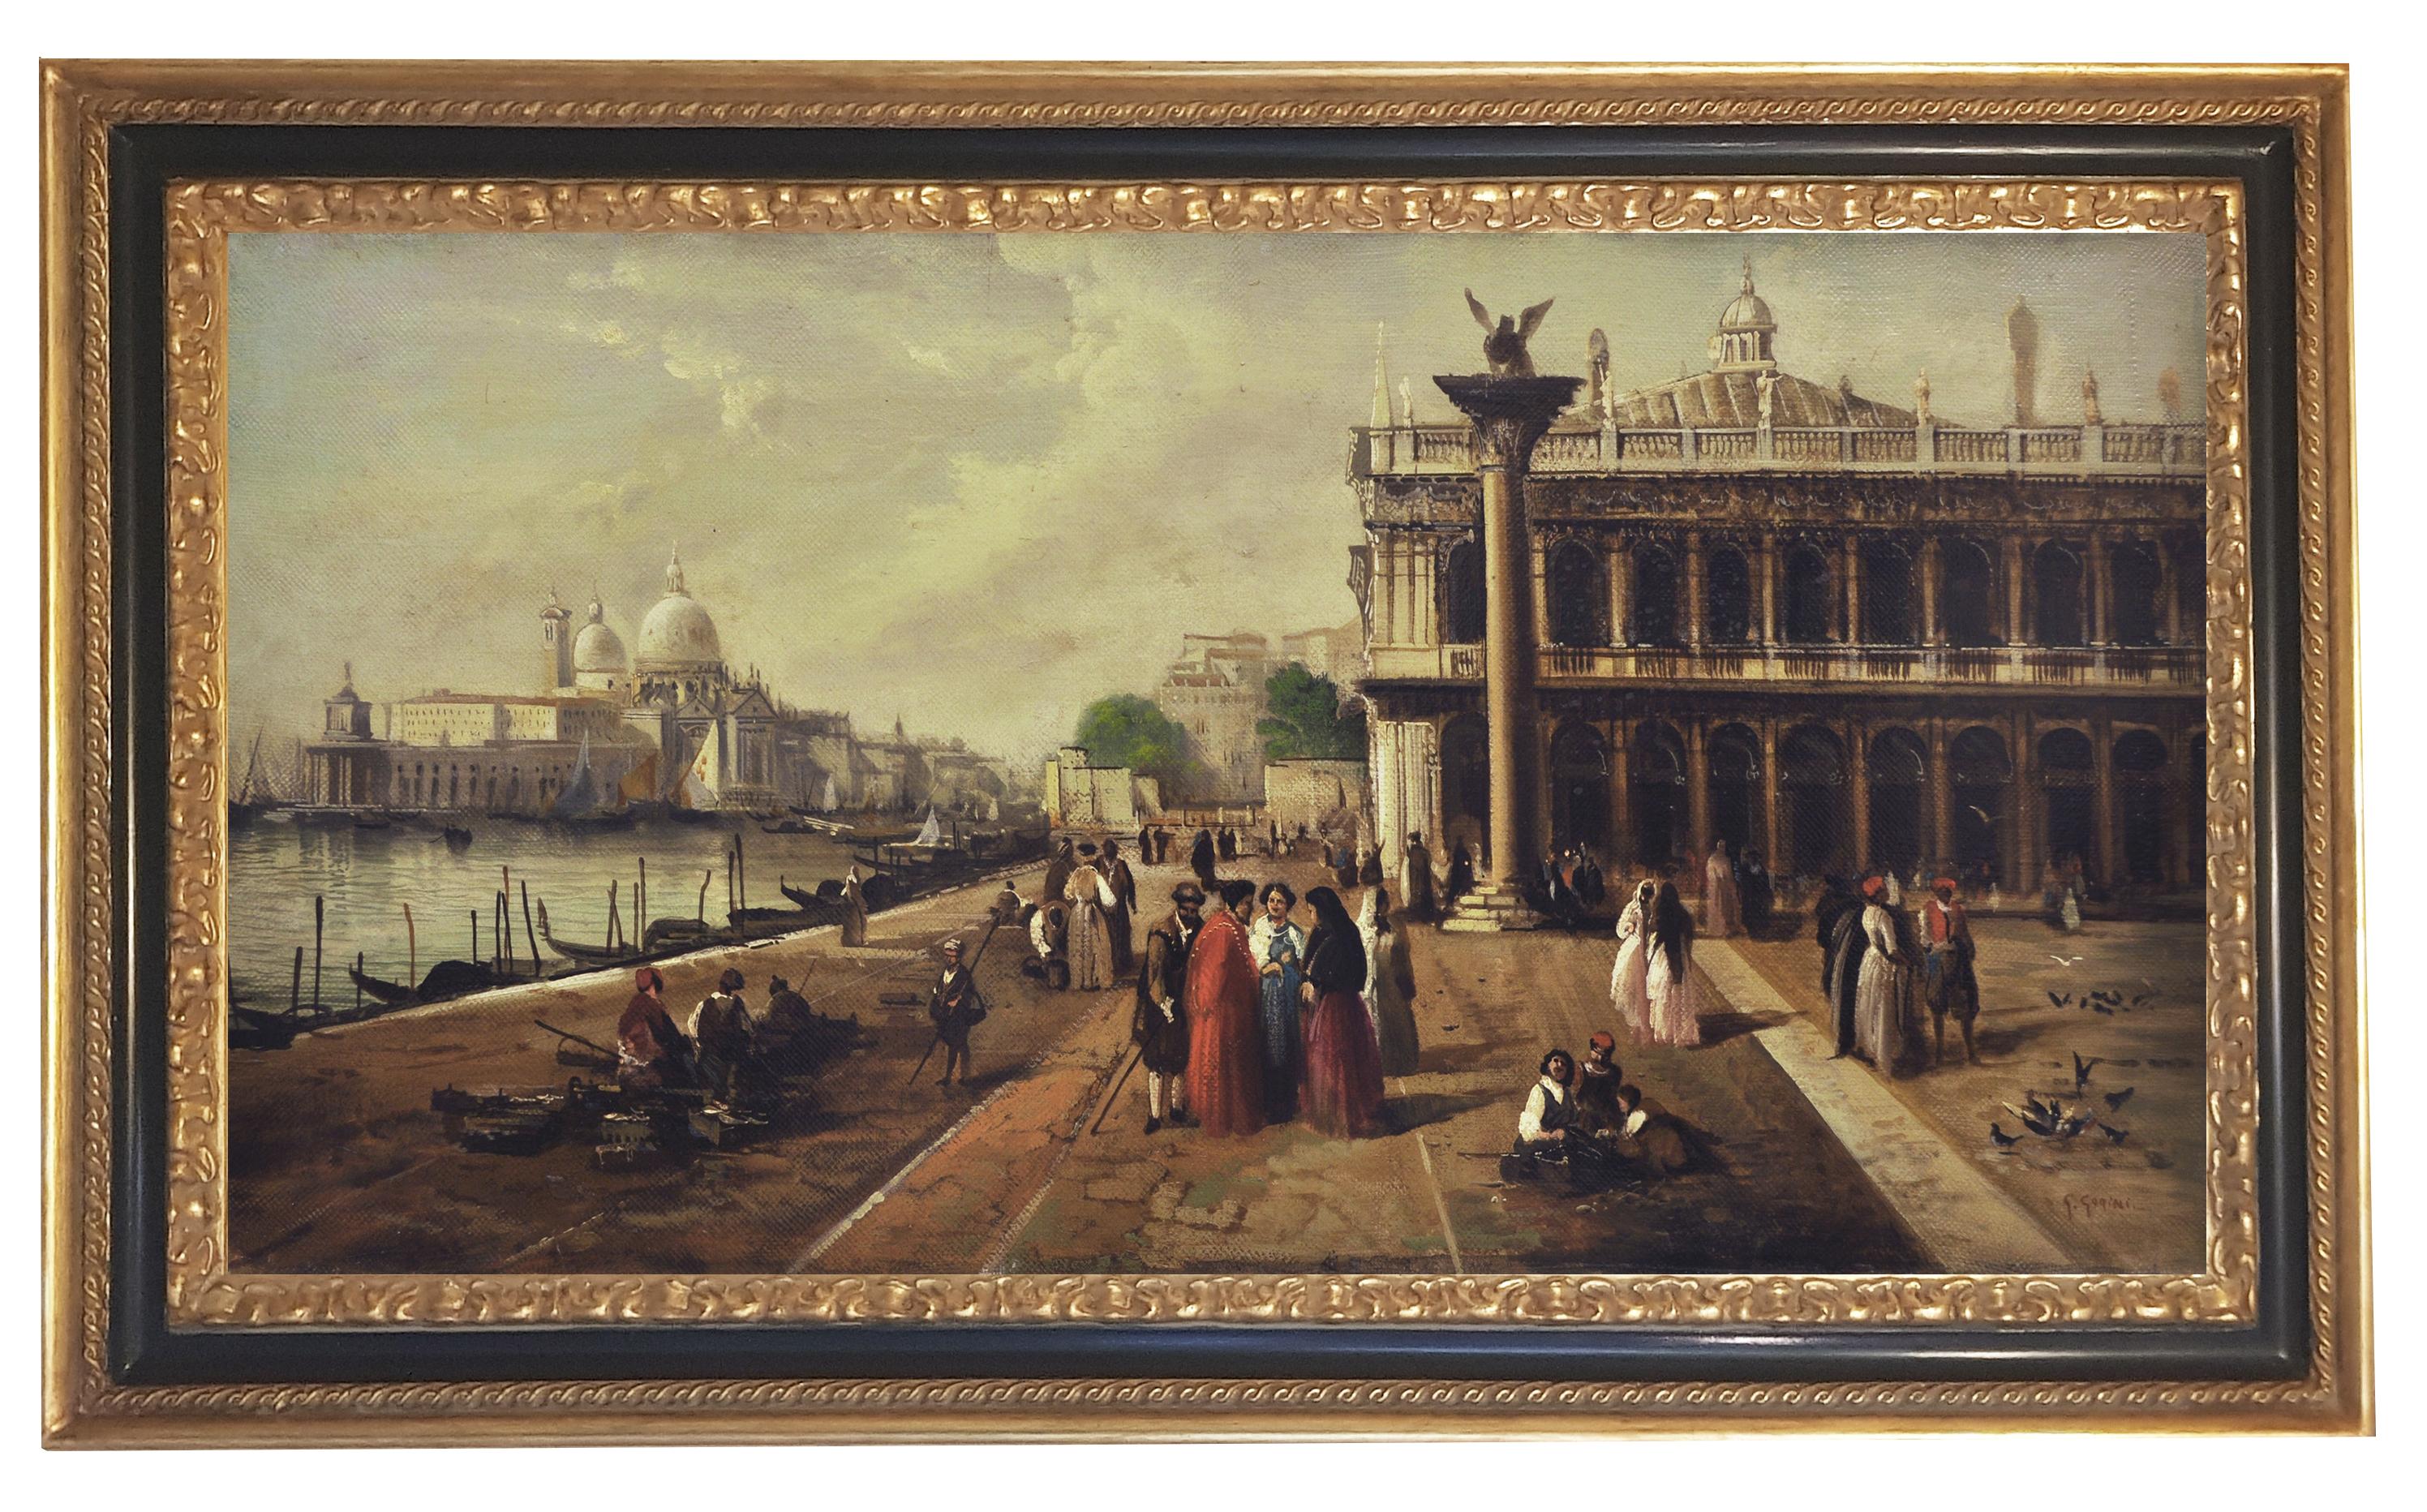 VENICE -In the Manner of Canaletto- Oil On Canvas Italian Landscape Painting